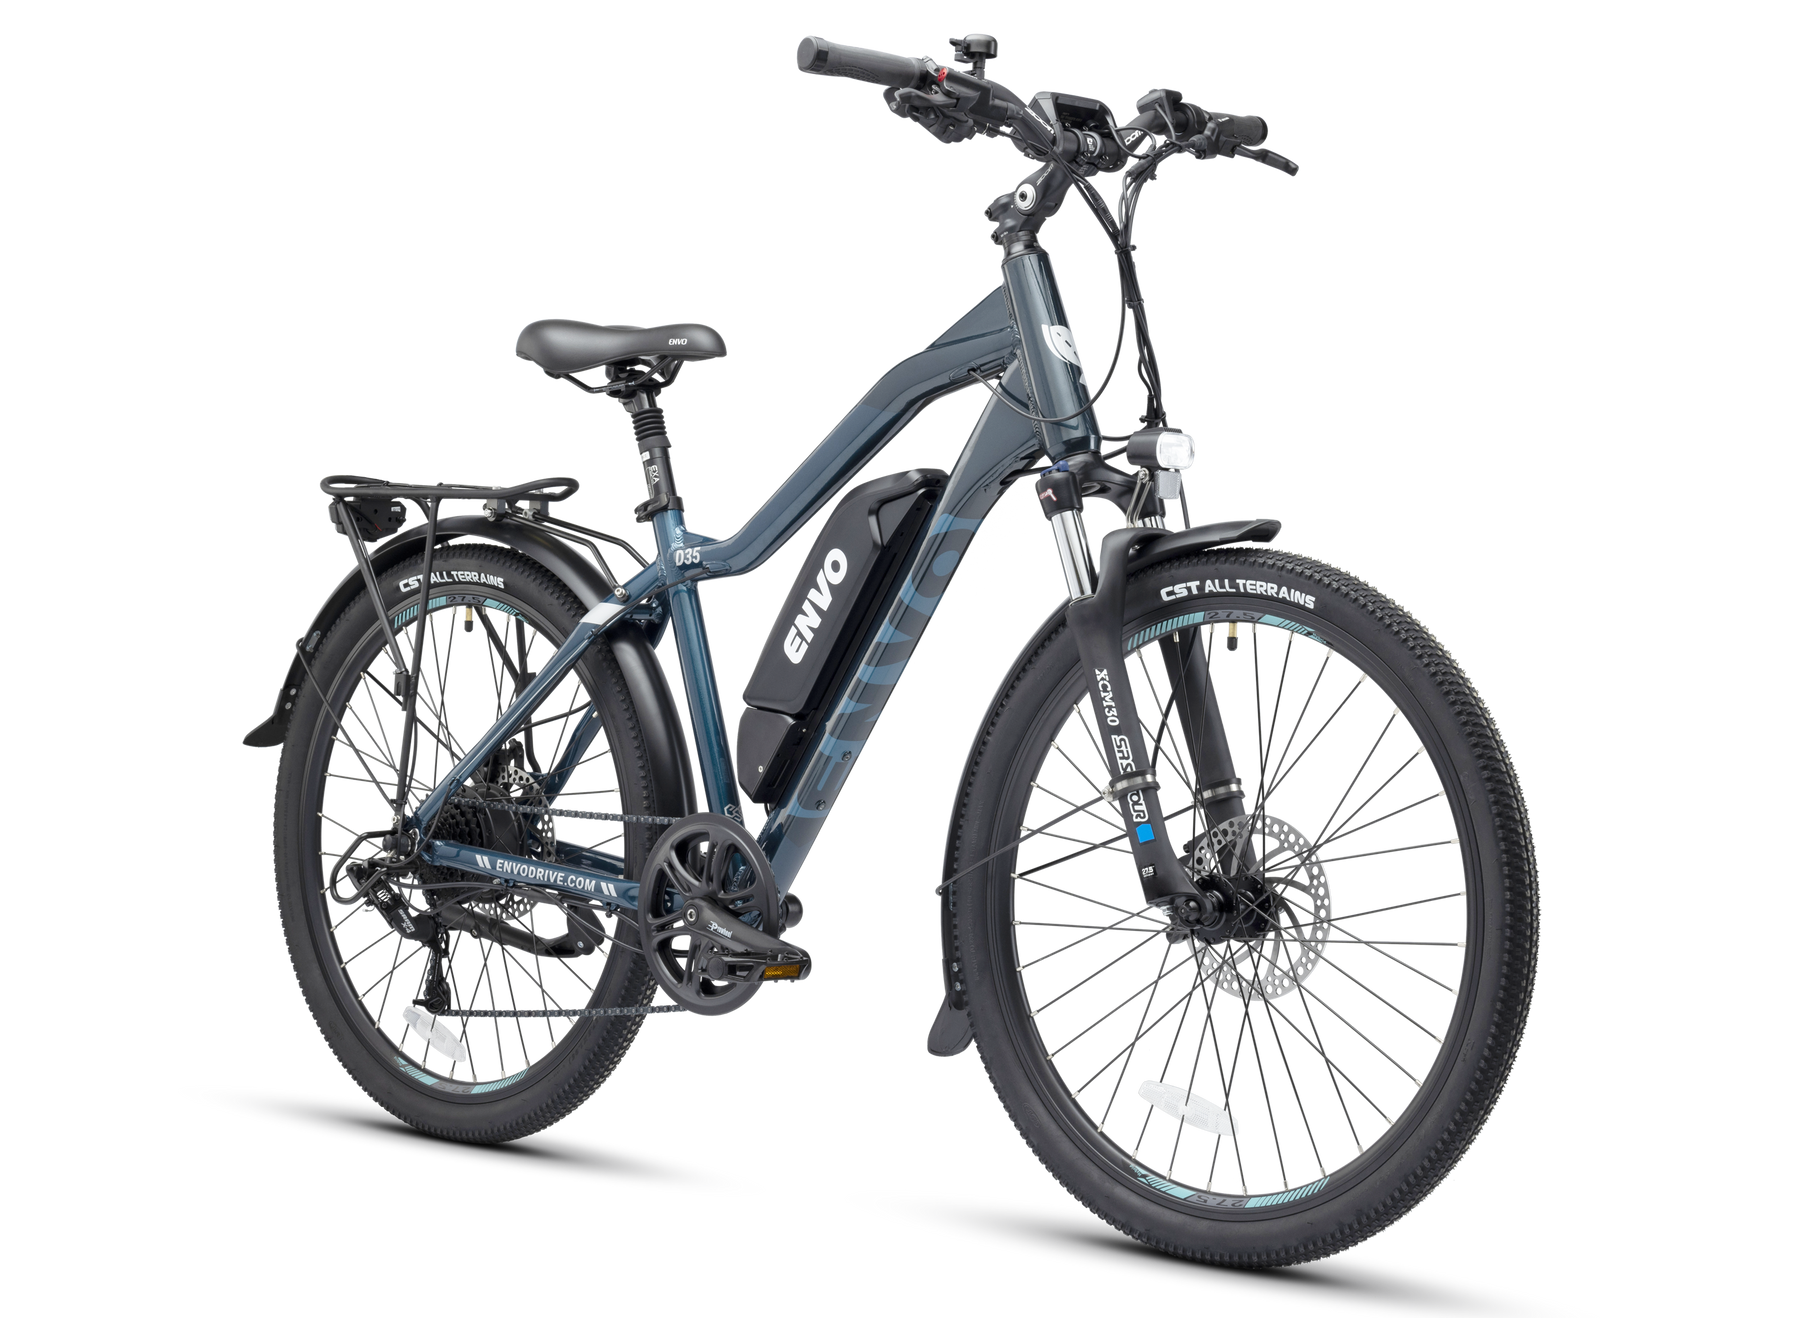 eBike ENVO d35 front view - teal color